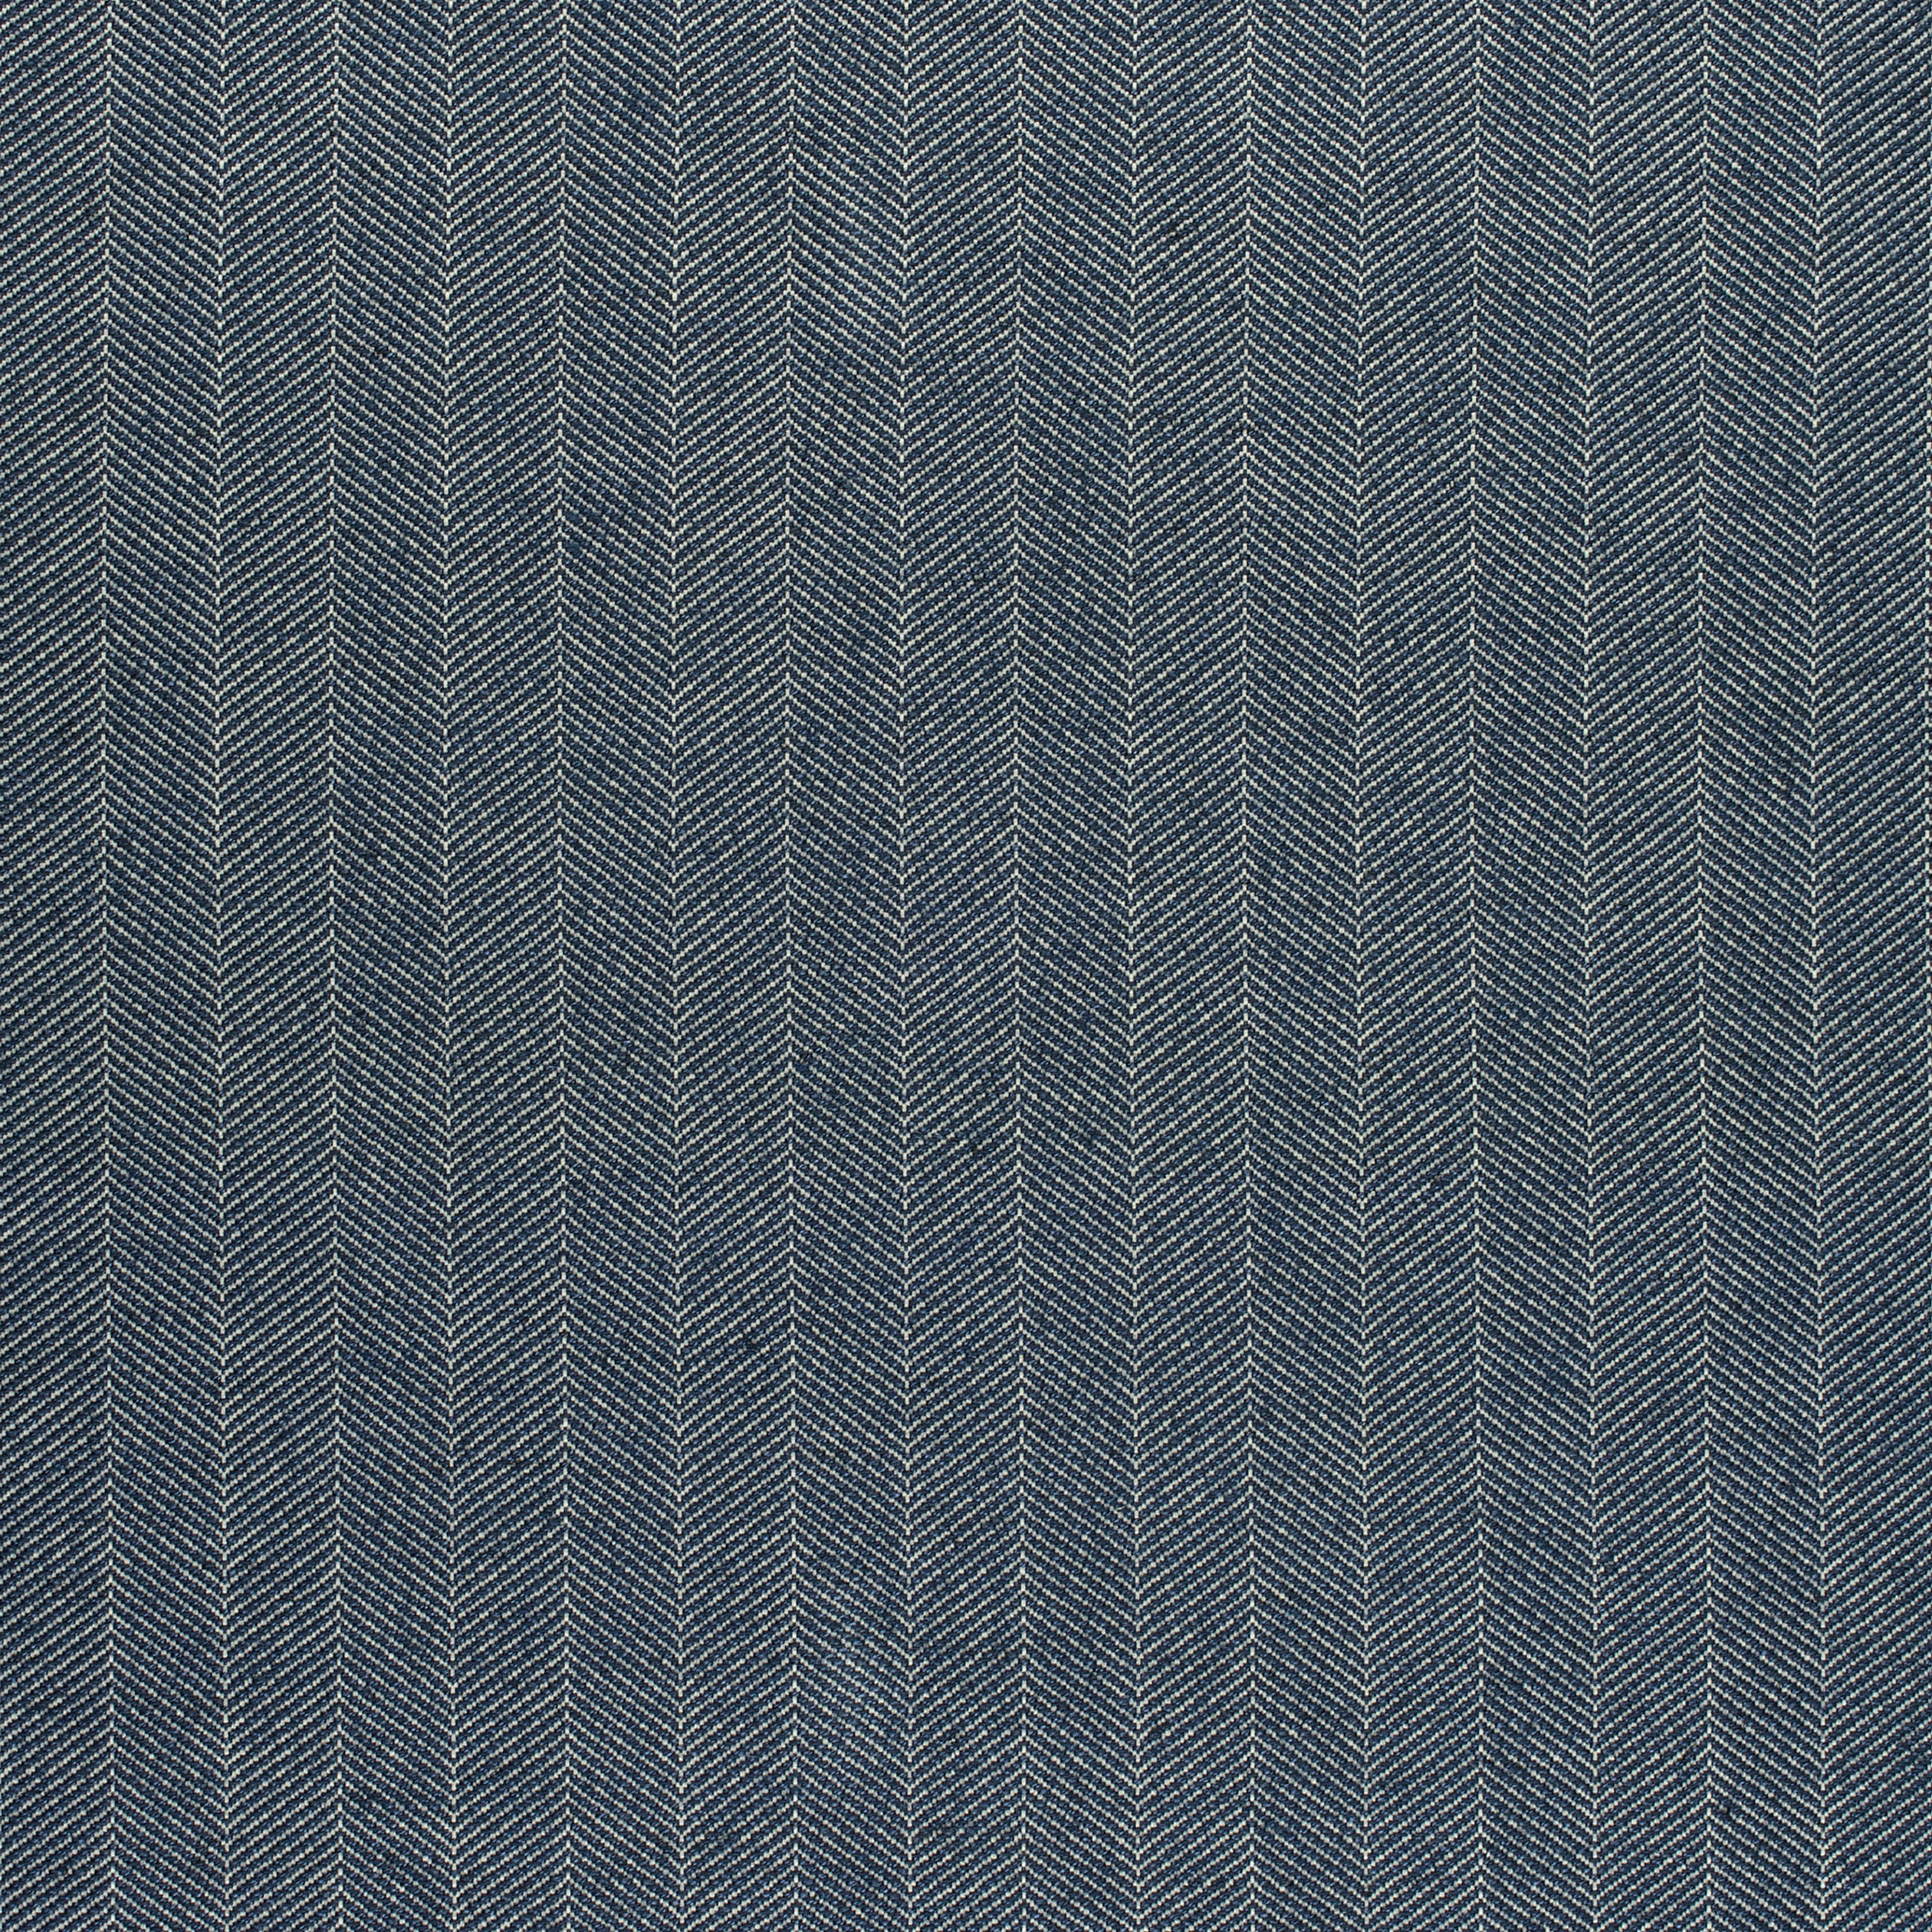 Hamilton Herringbone fabric in ink color - pattern number W80673 - by Thibaut in the Pinnacle collection